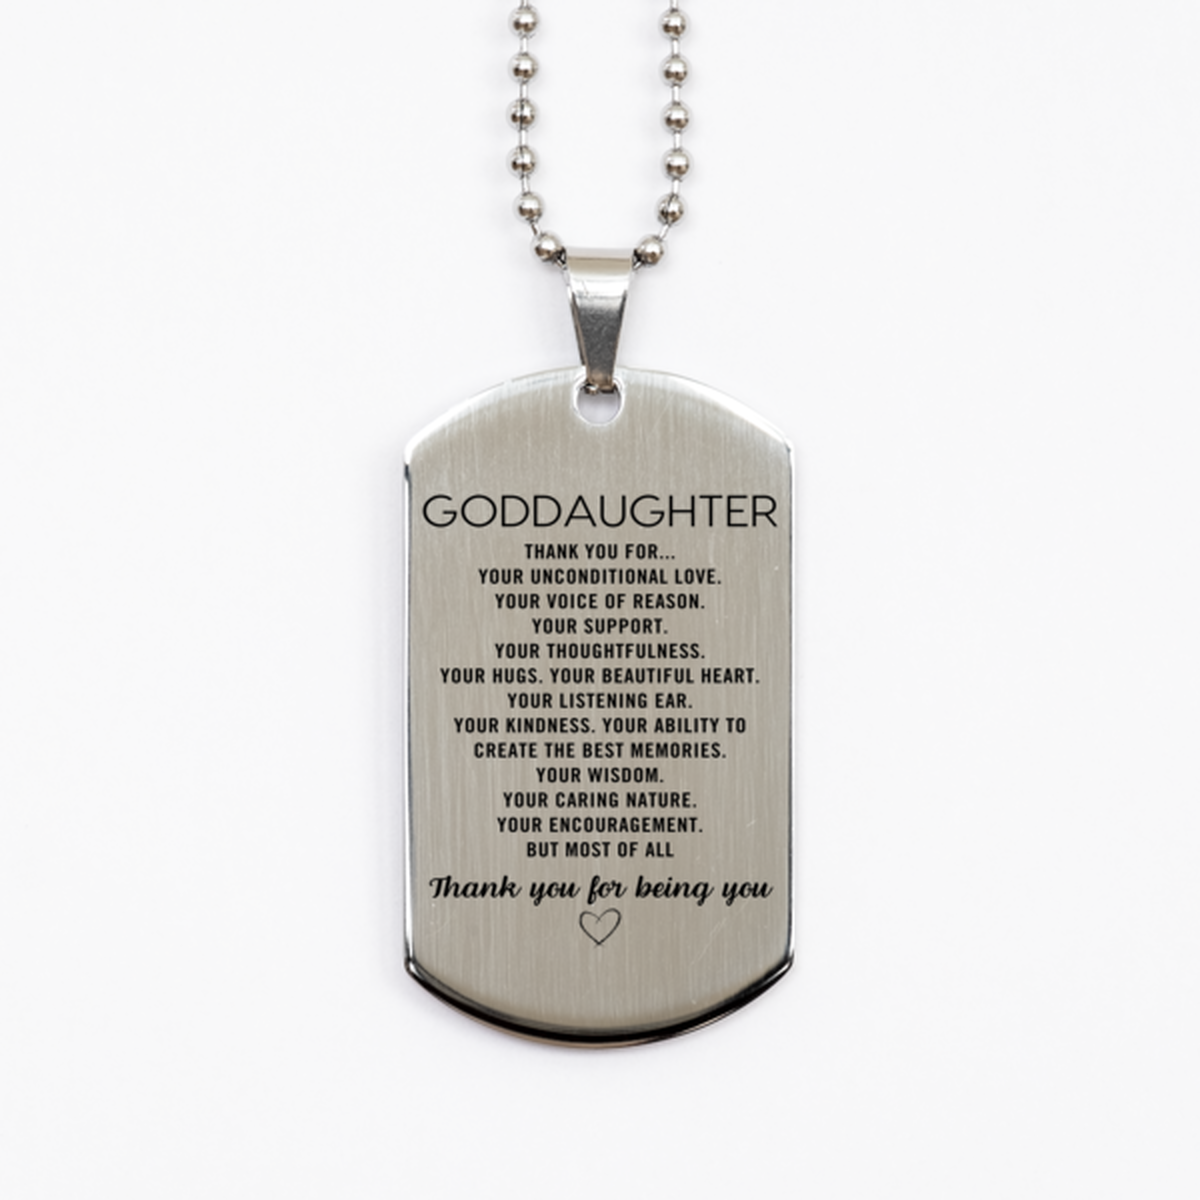 Goddaughter Silver Dog Tag Custom, Engraved Gifts For Goddaughter Christmas Graduation Birthday Gifts for Men Women Goddaughter Thank you for Your unconditional love